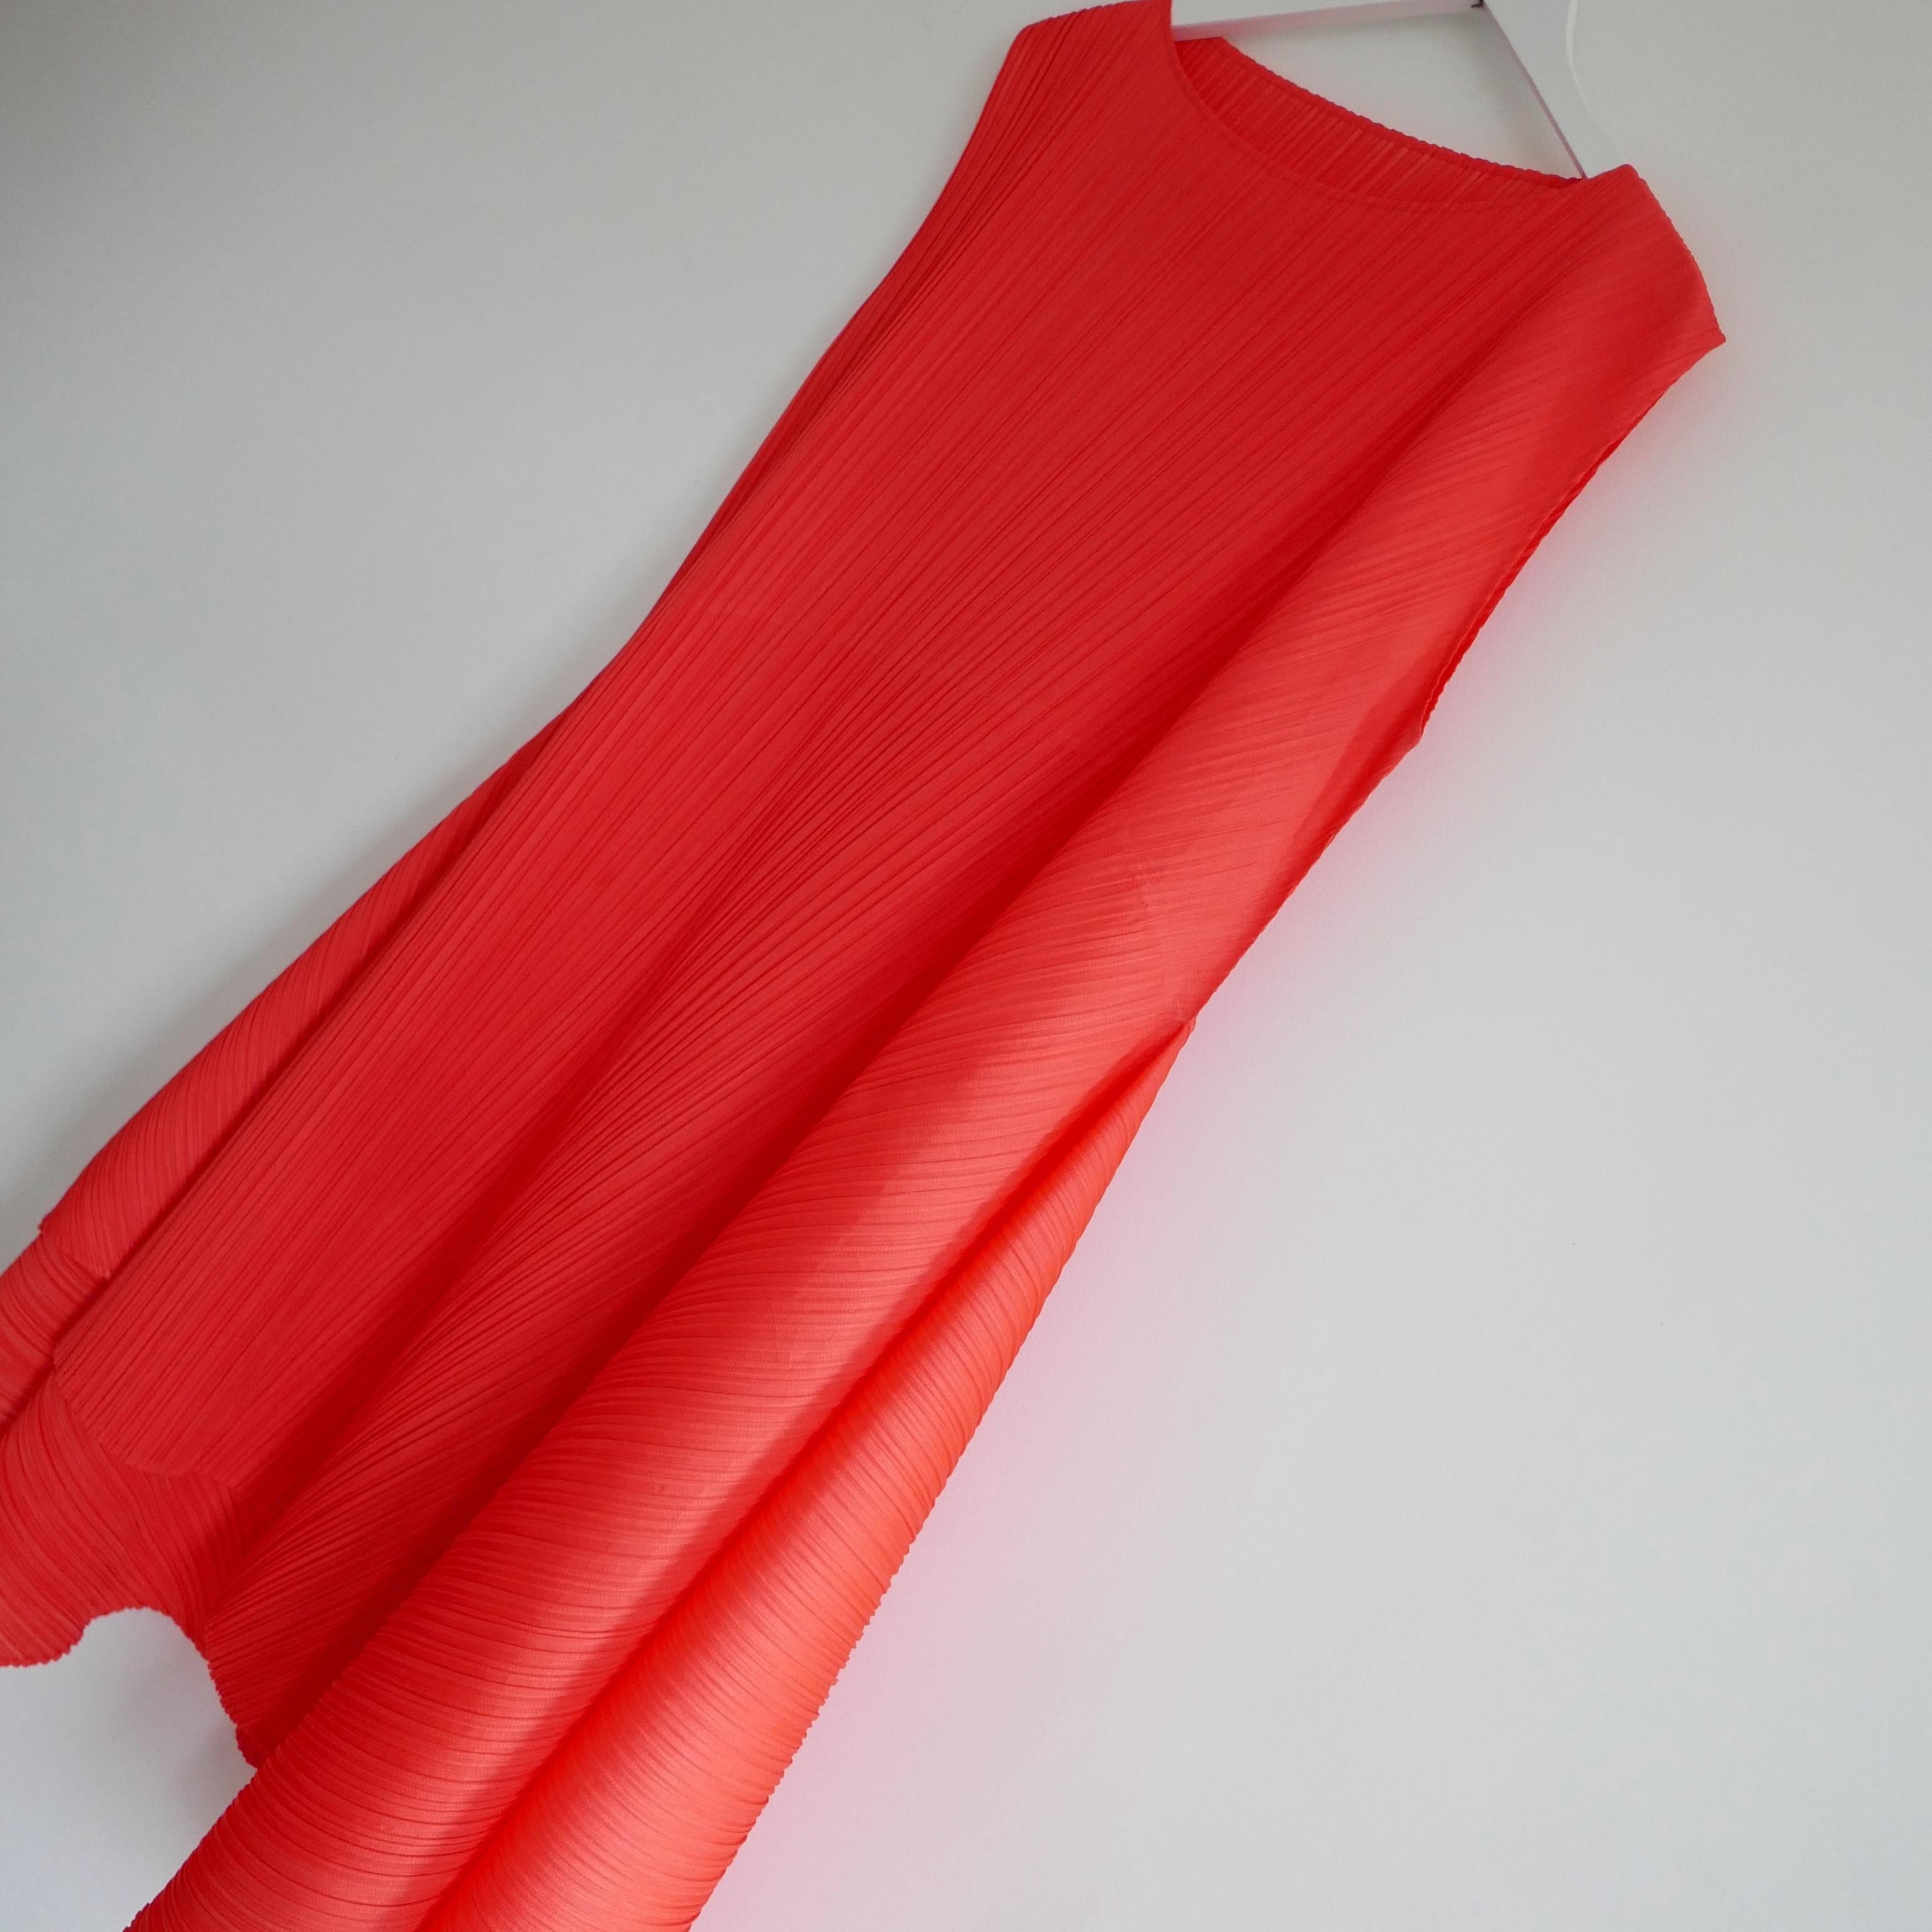  Issey Miyake Pleats Please Flared Dress In Excellent Condition For Sale In London, GB